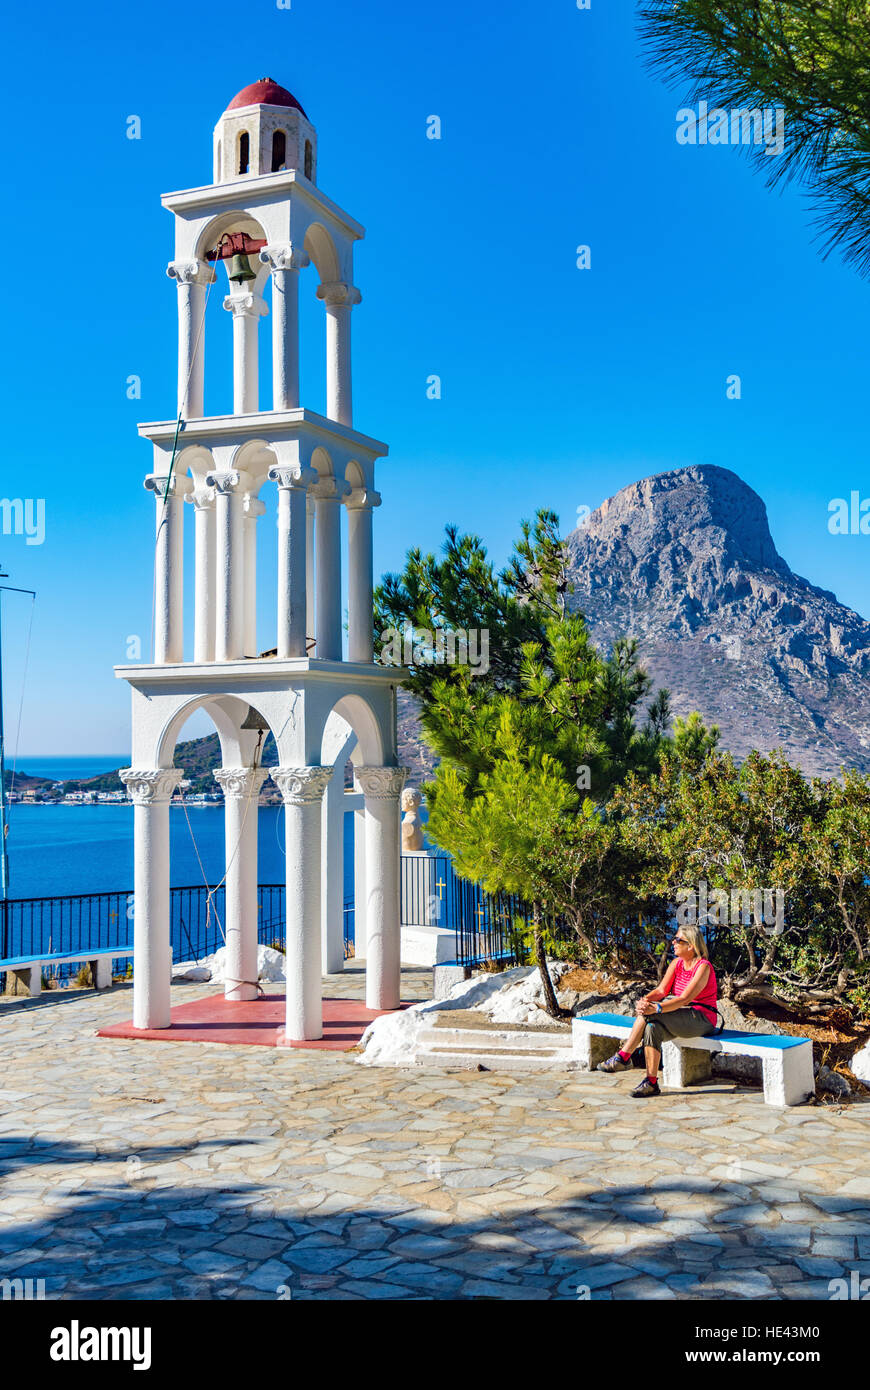 Female figure in red sat by white bell tower, blue sky, blue sea, Kalymnos Stock Photo